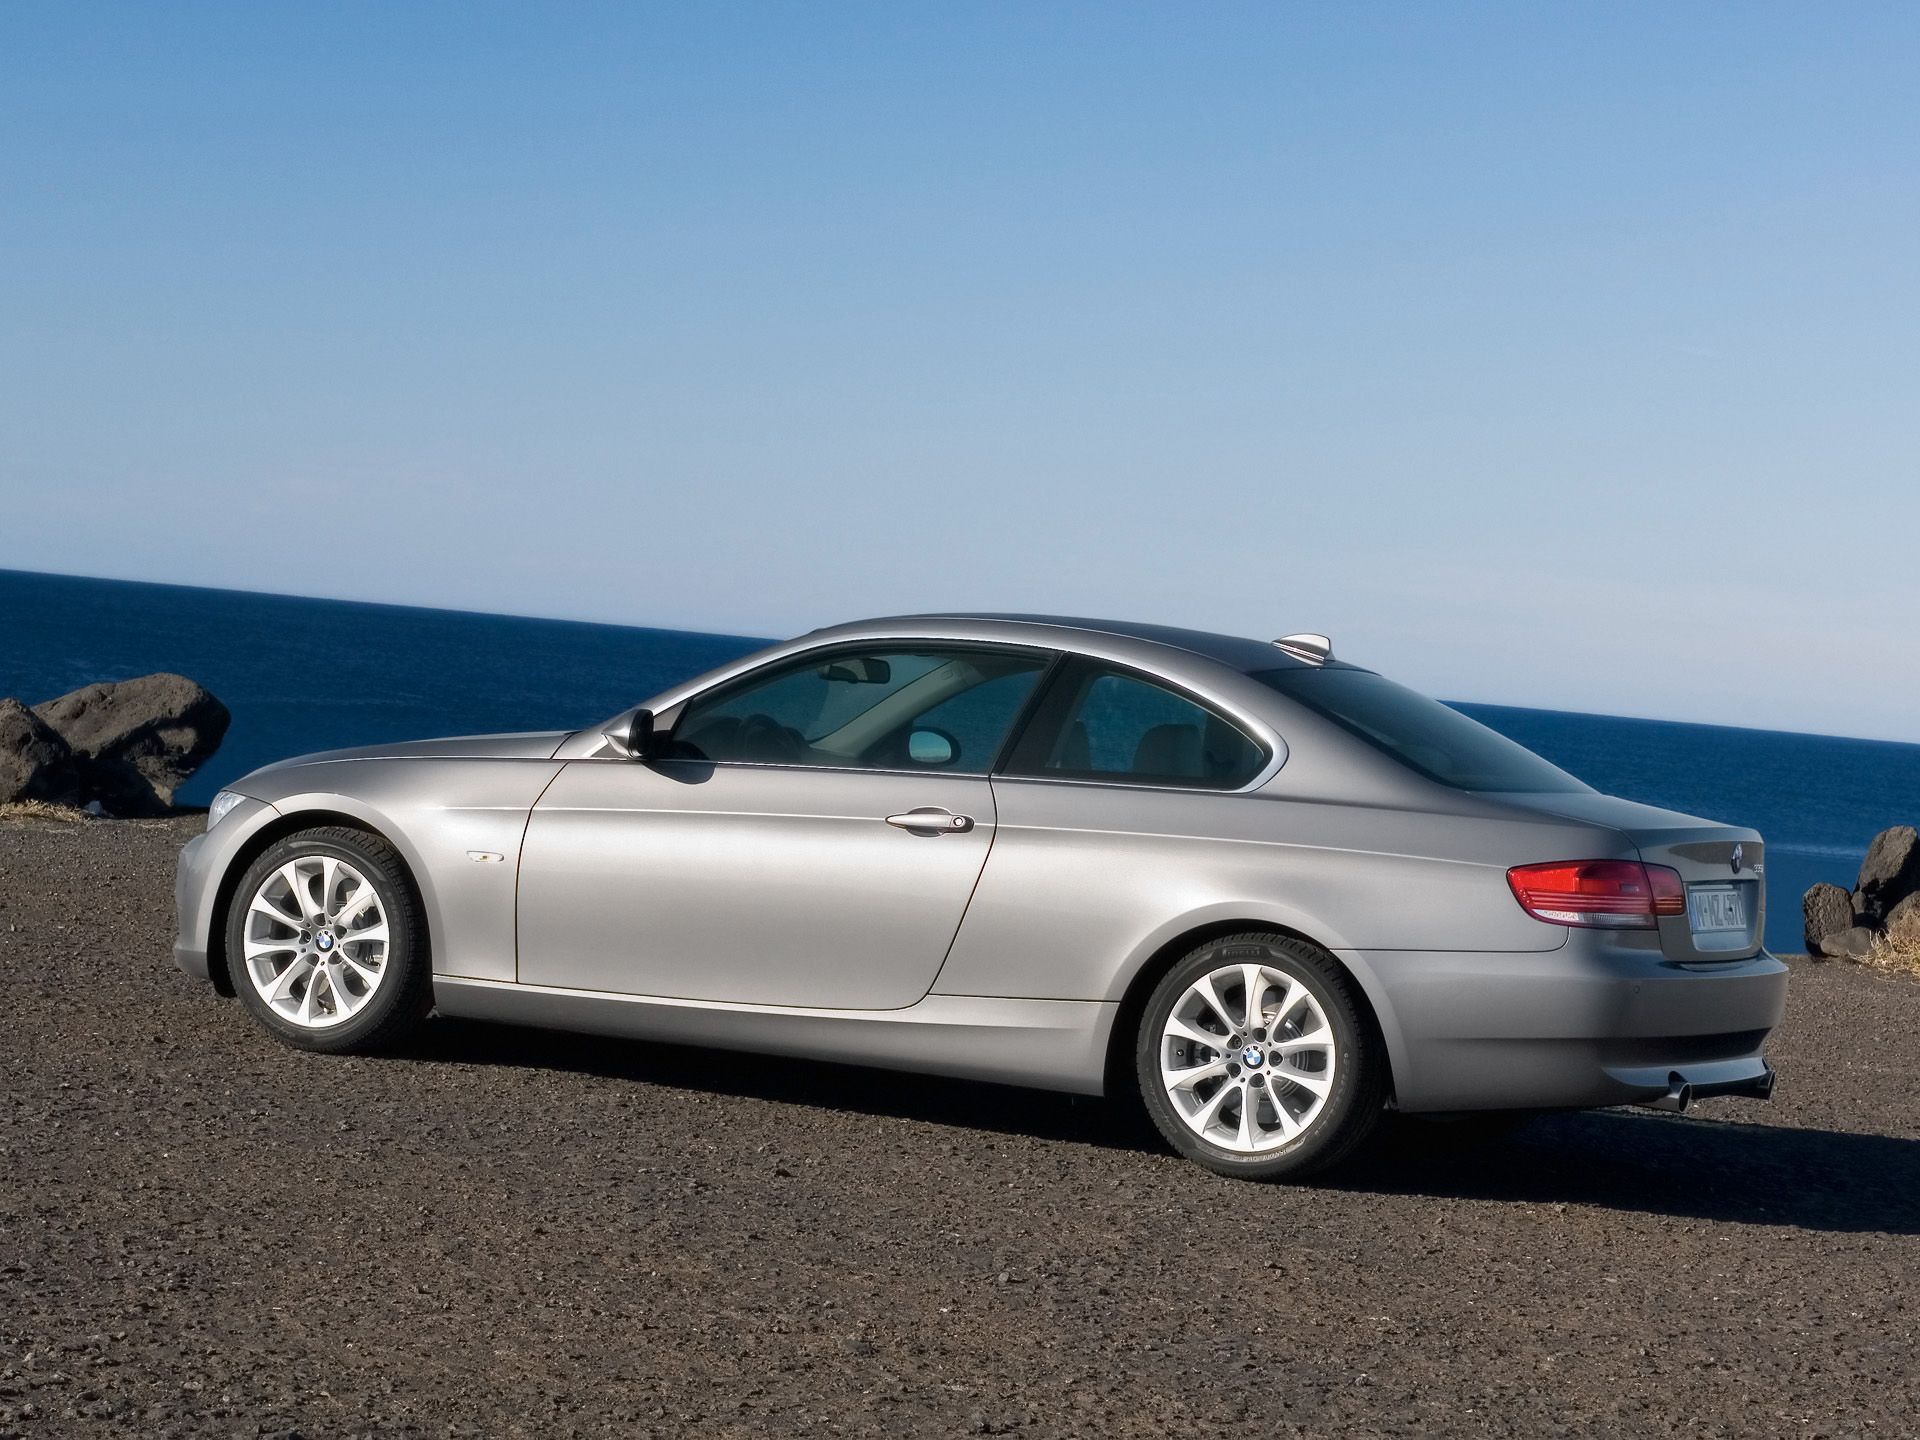 BMW 335i Coupe wallpaper. BMW 335i Coupe